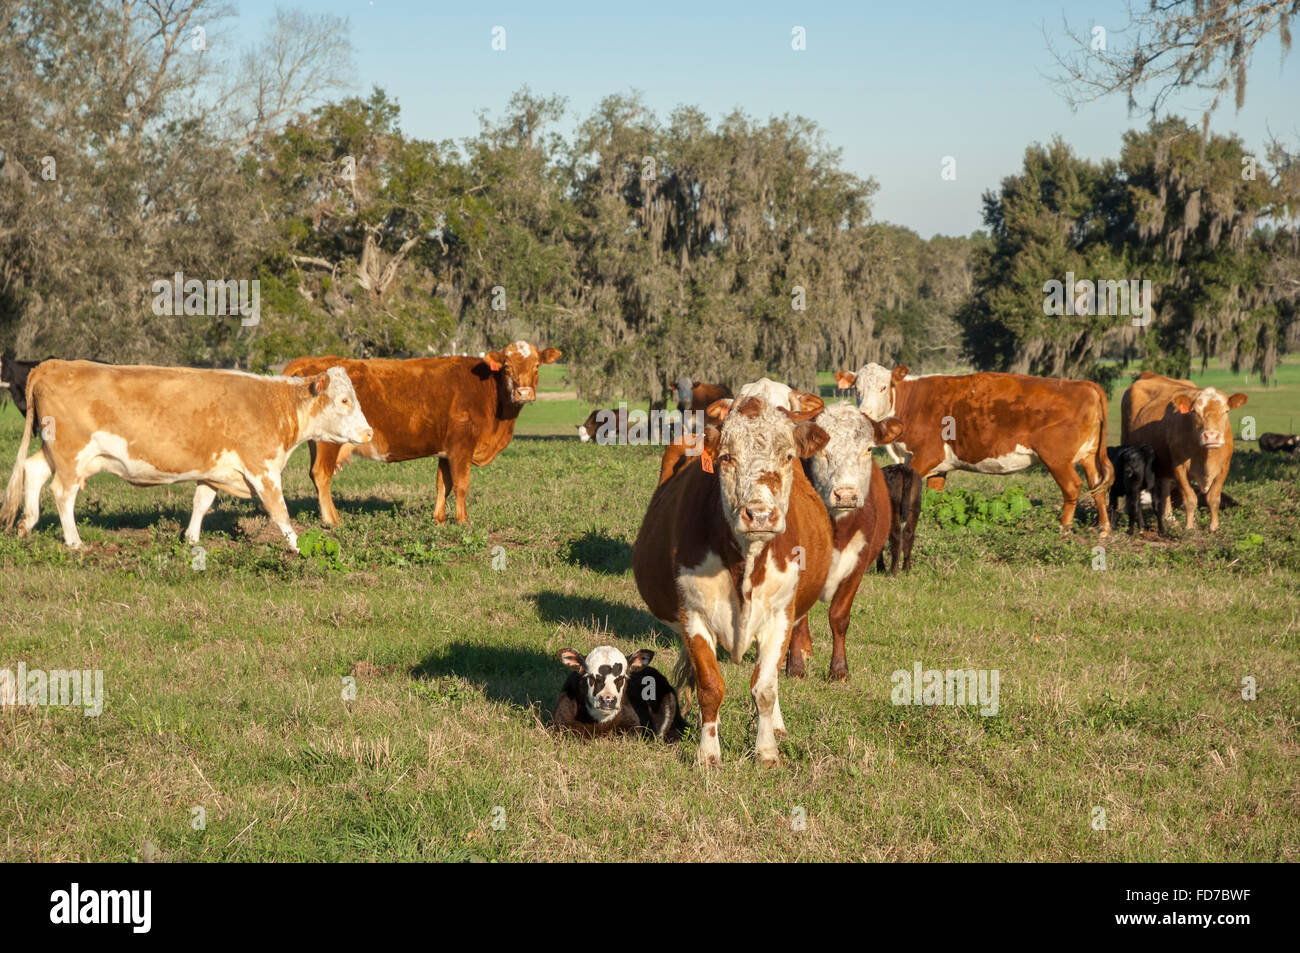 Commercial beef cattle with calves Stock Photo